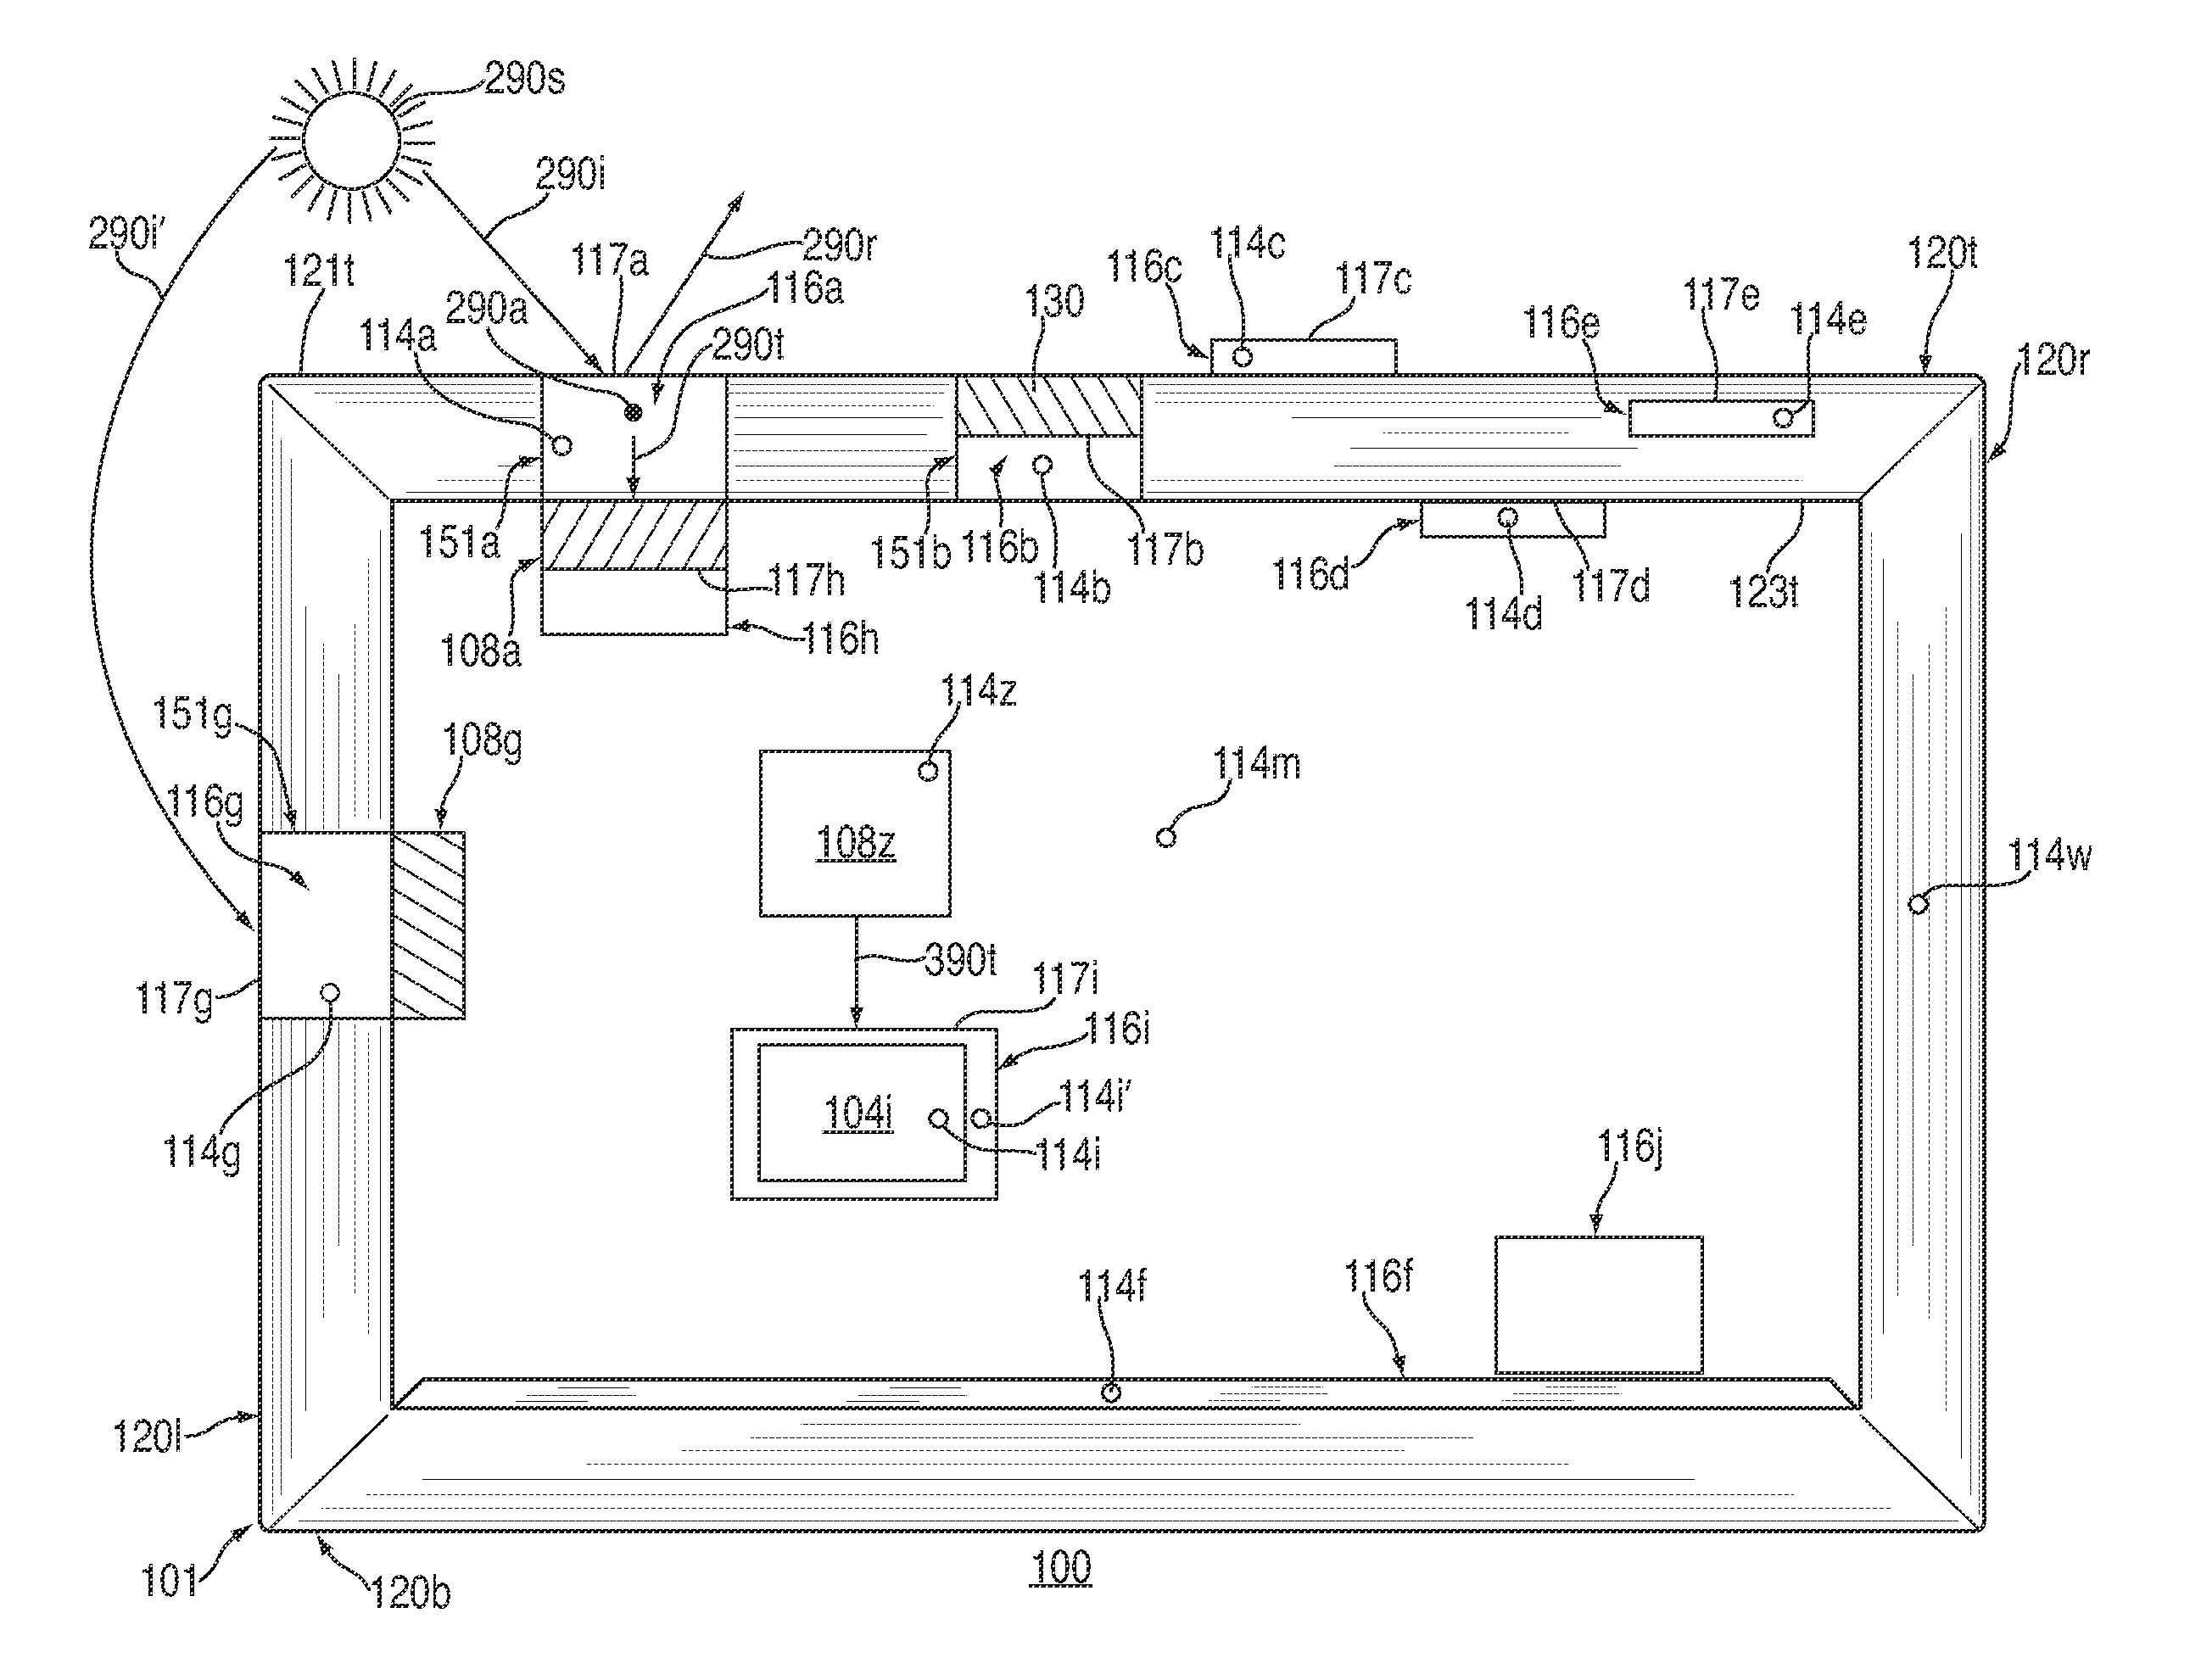 Systems, methods, and computer-readable media for thermally managing electronic devices using dynamic optical components